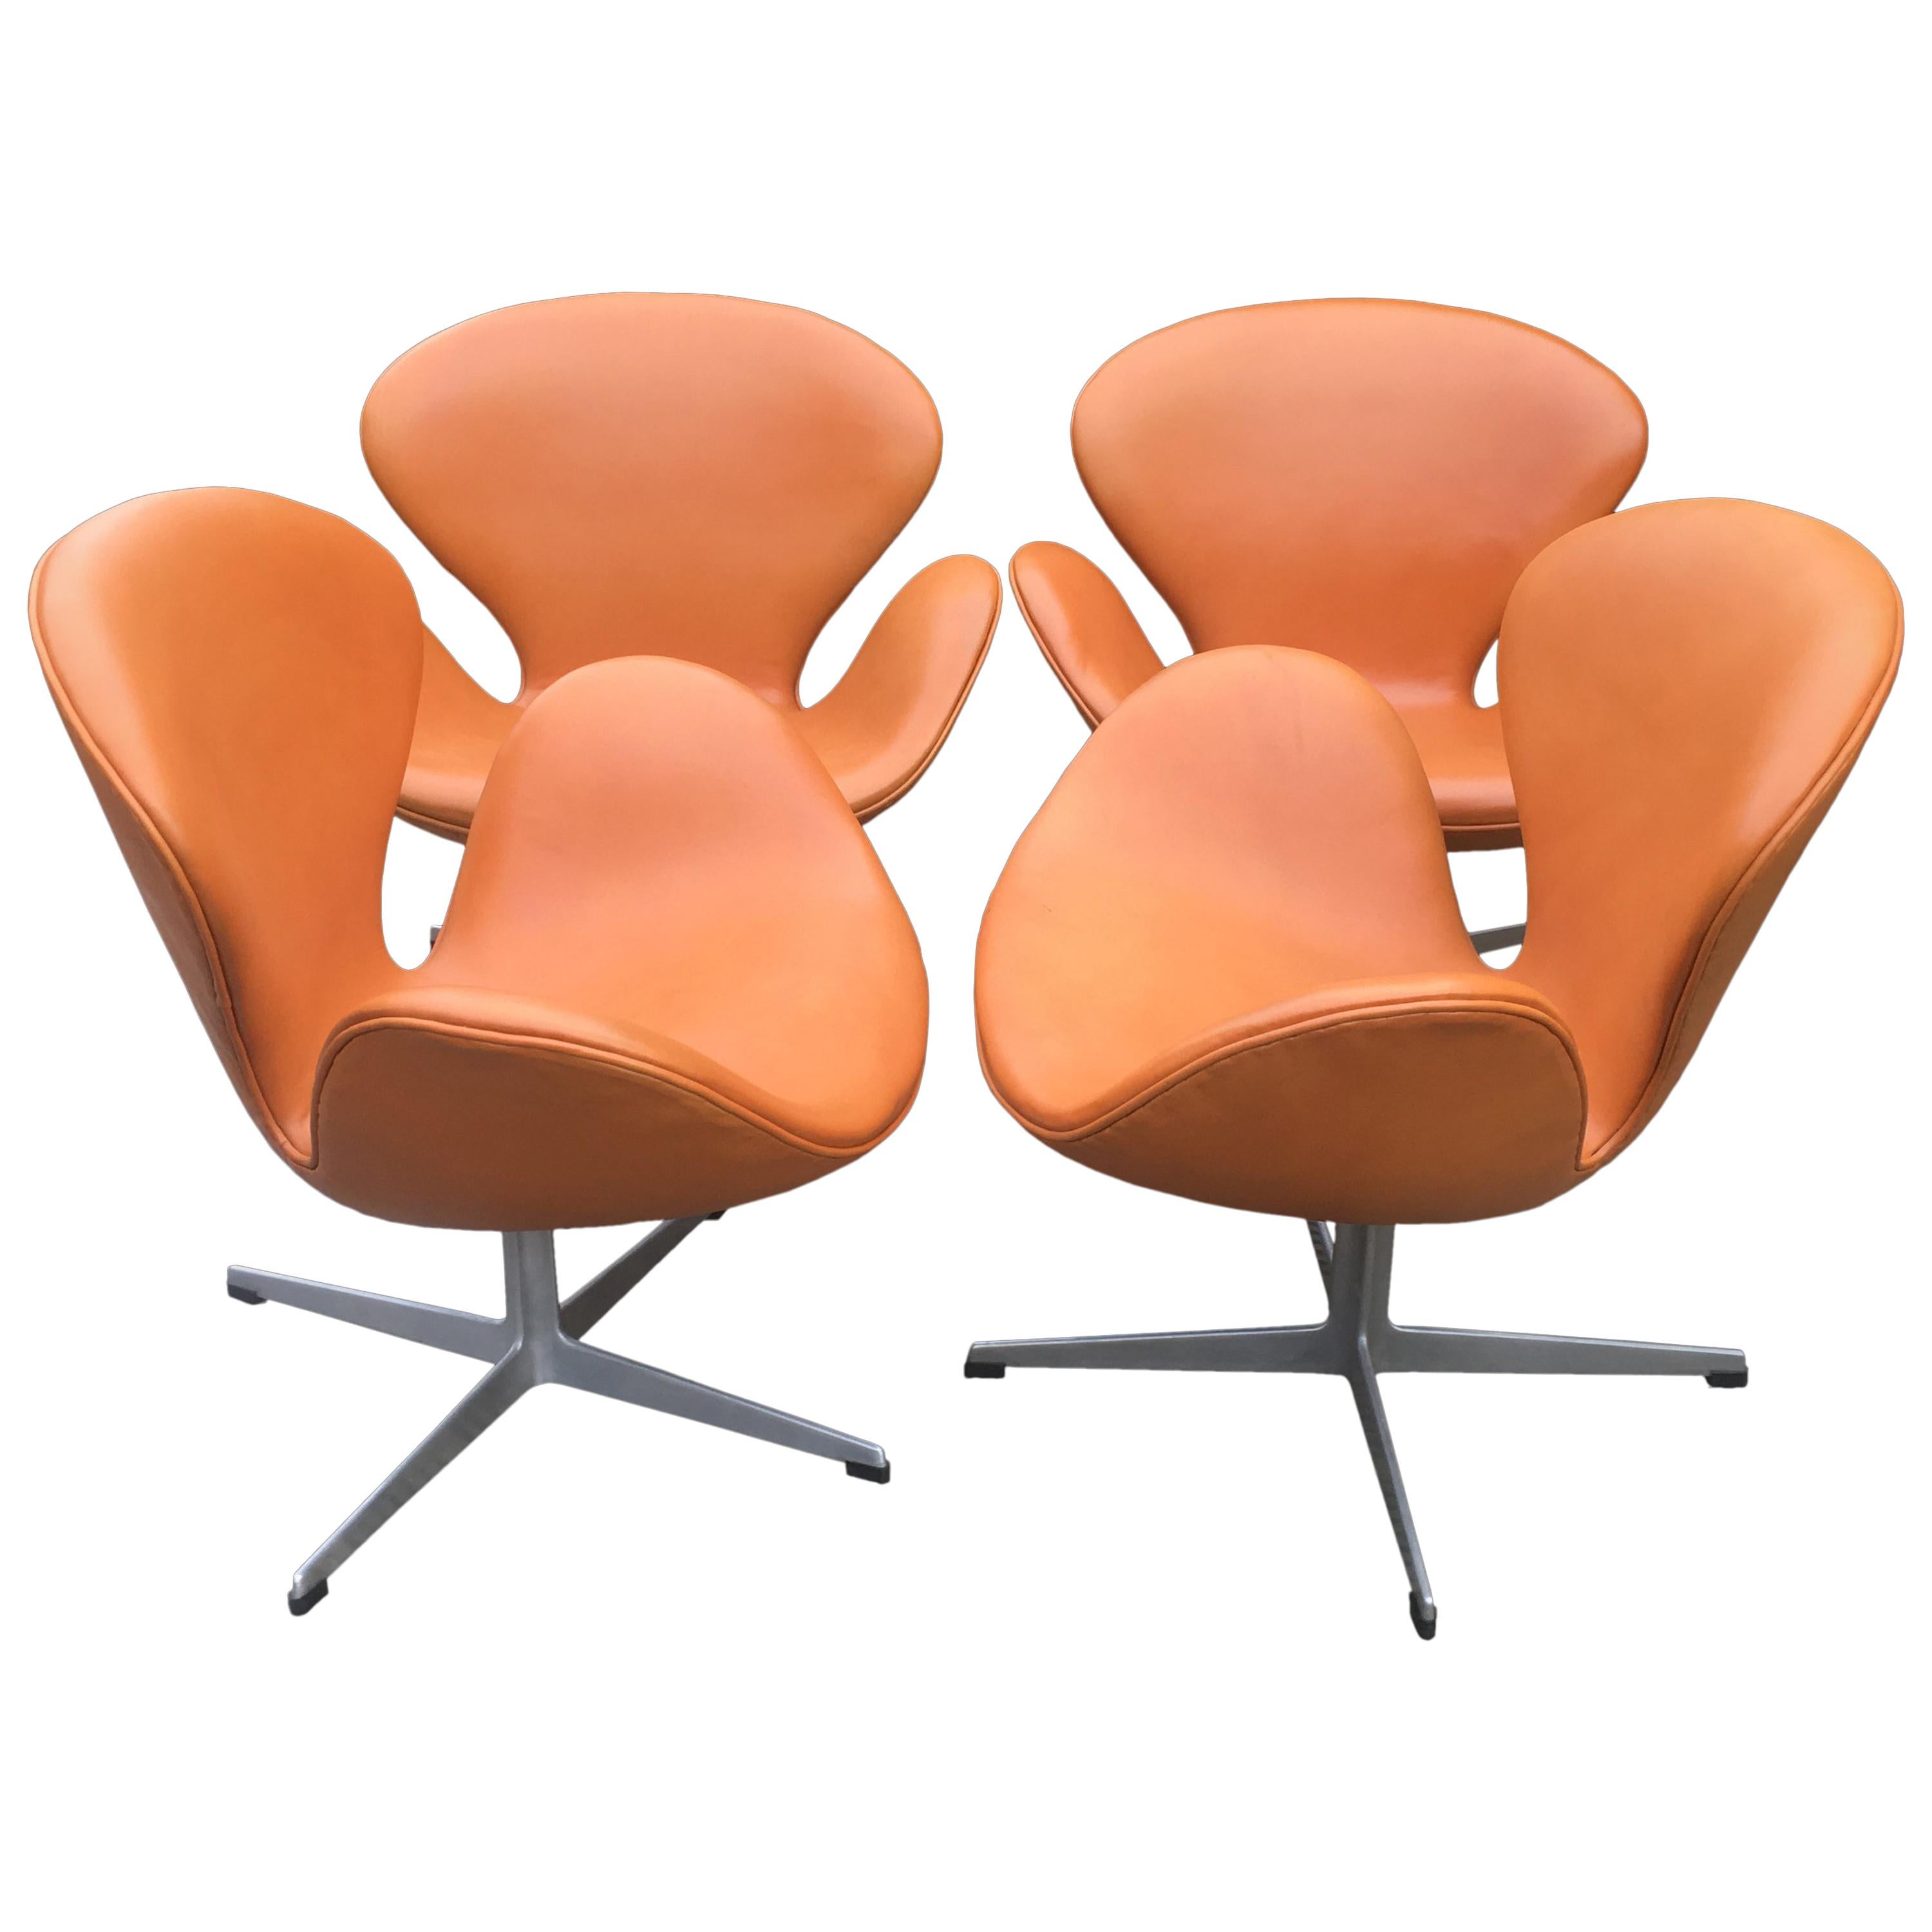 Rare Pair of Cognac Leather Swan Chairs by Arne Jacobsen for Fritz Hansen